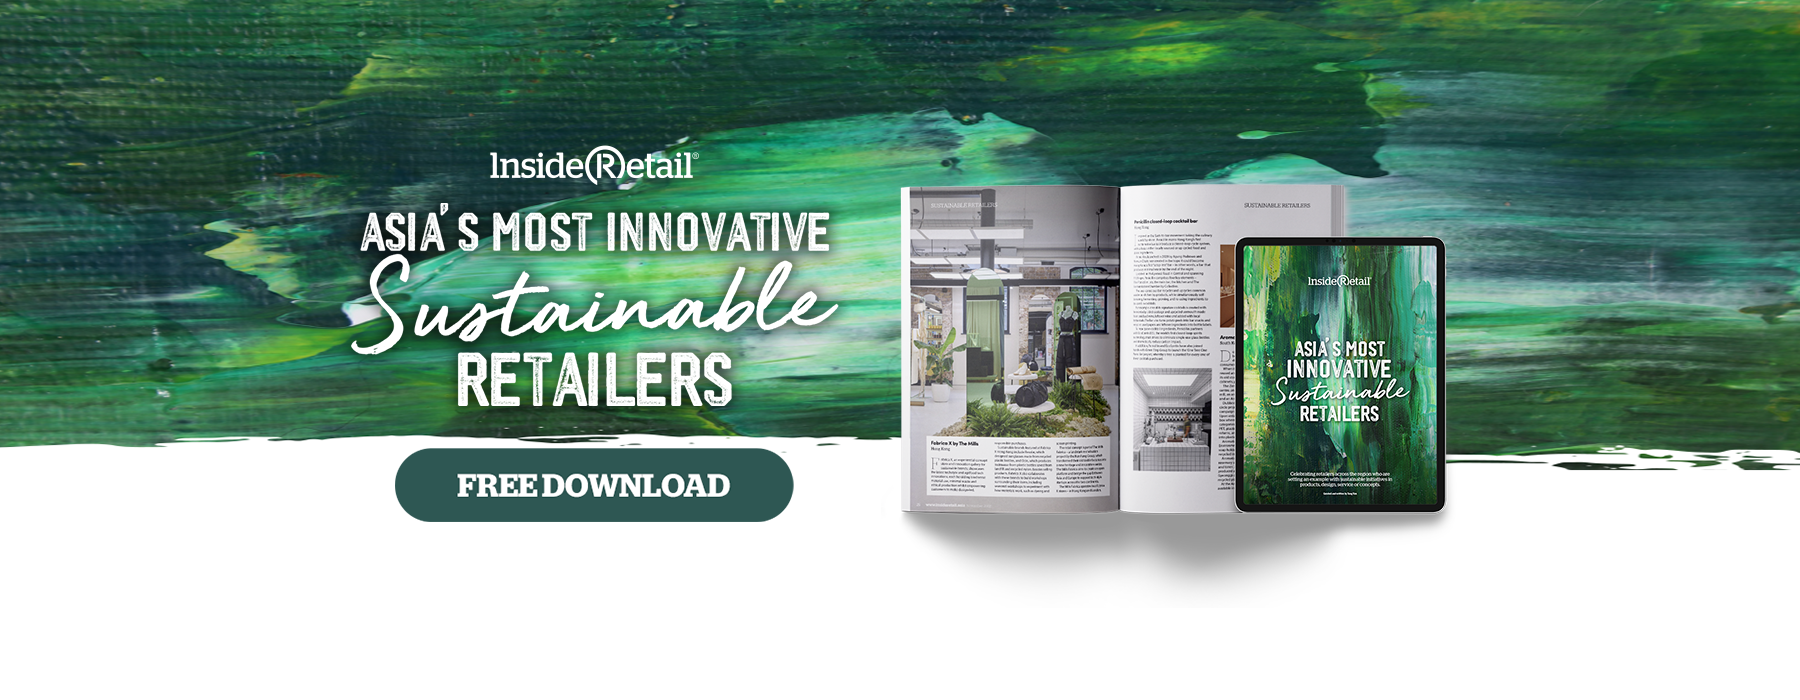 Asia's most innovative sustainable retailers